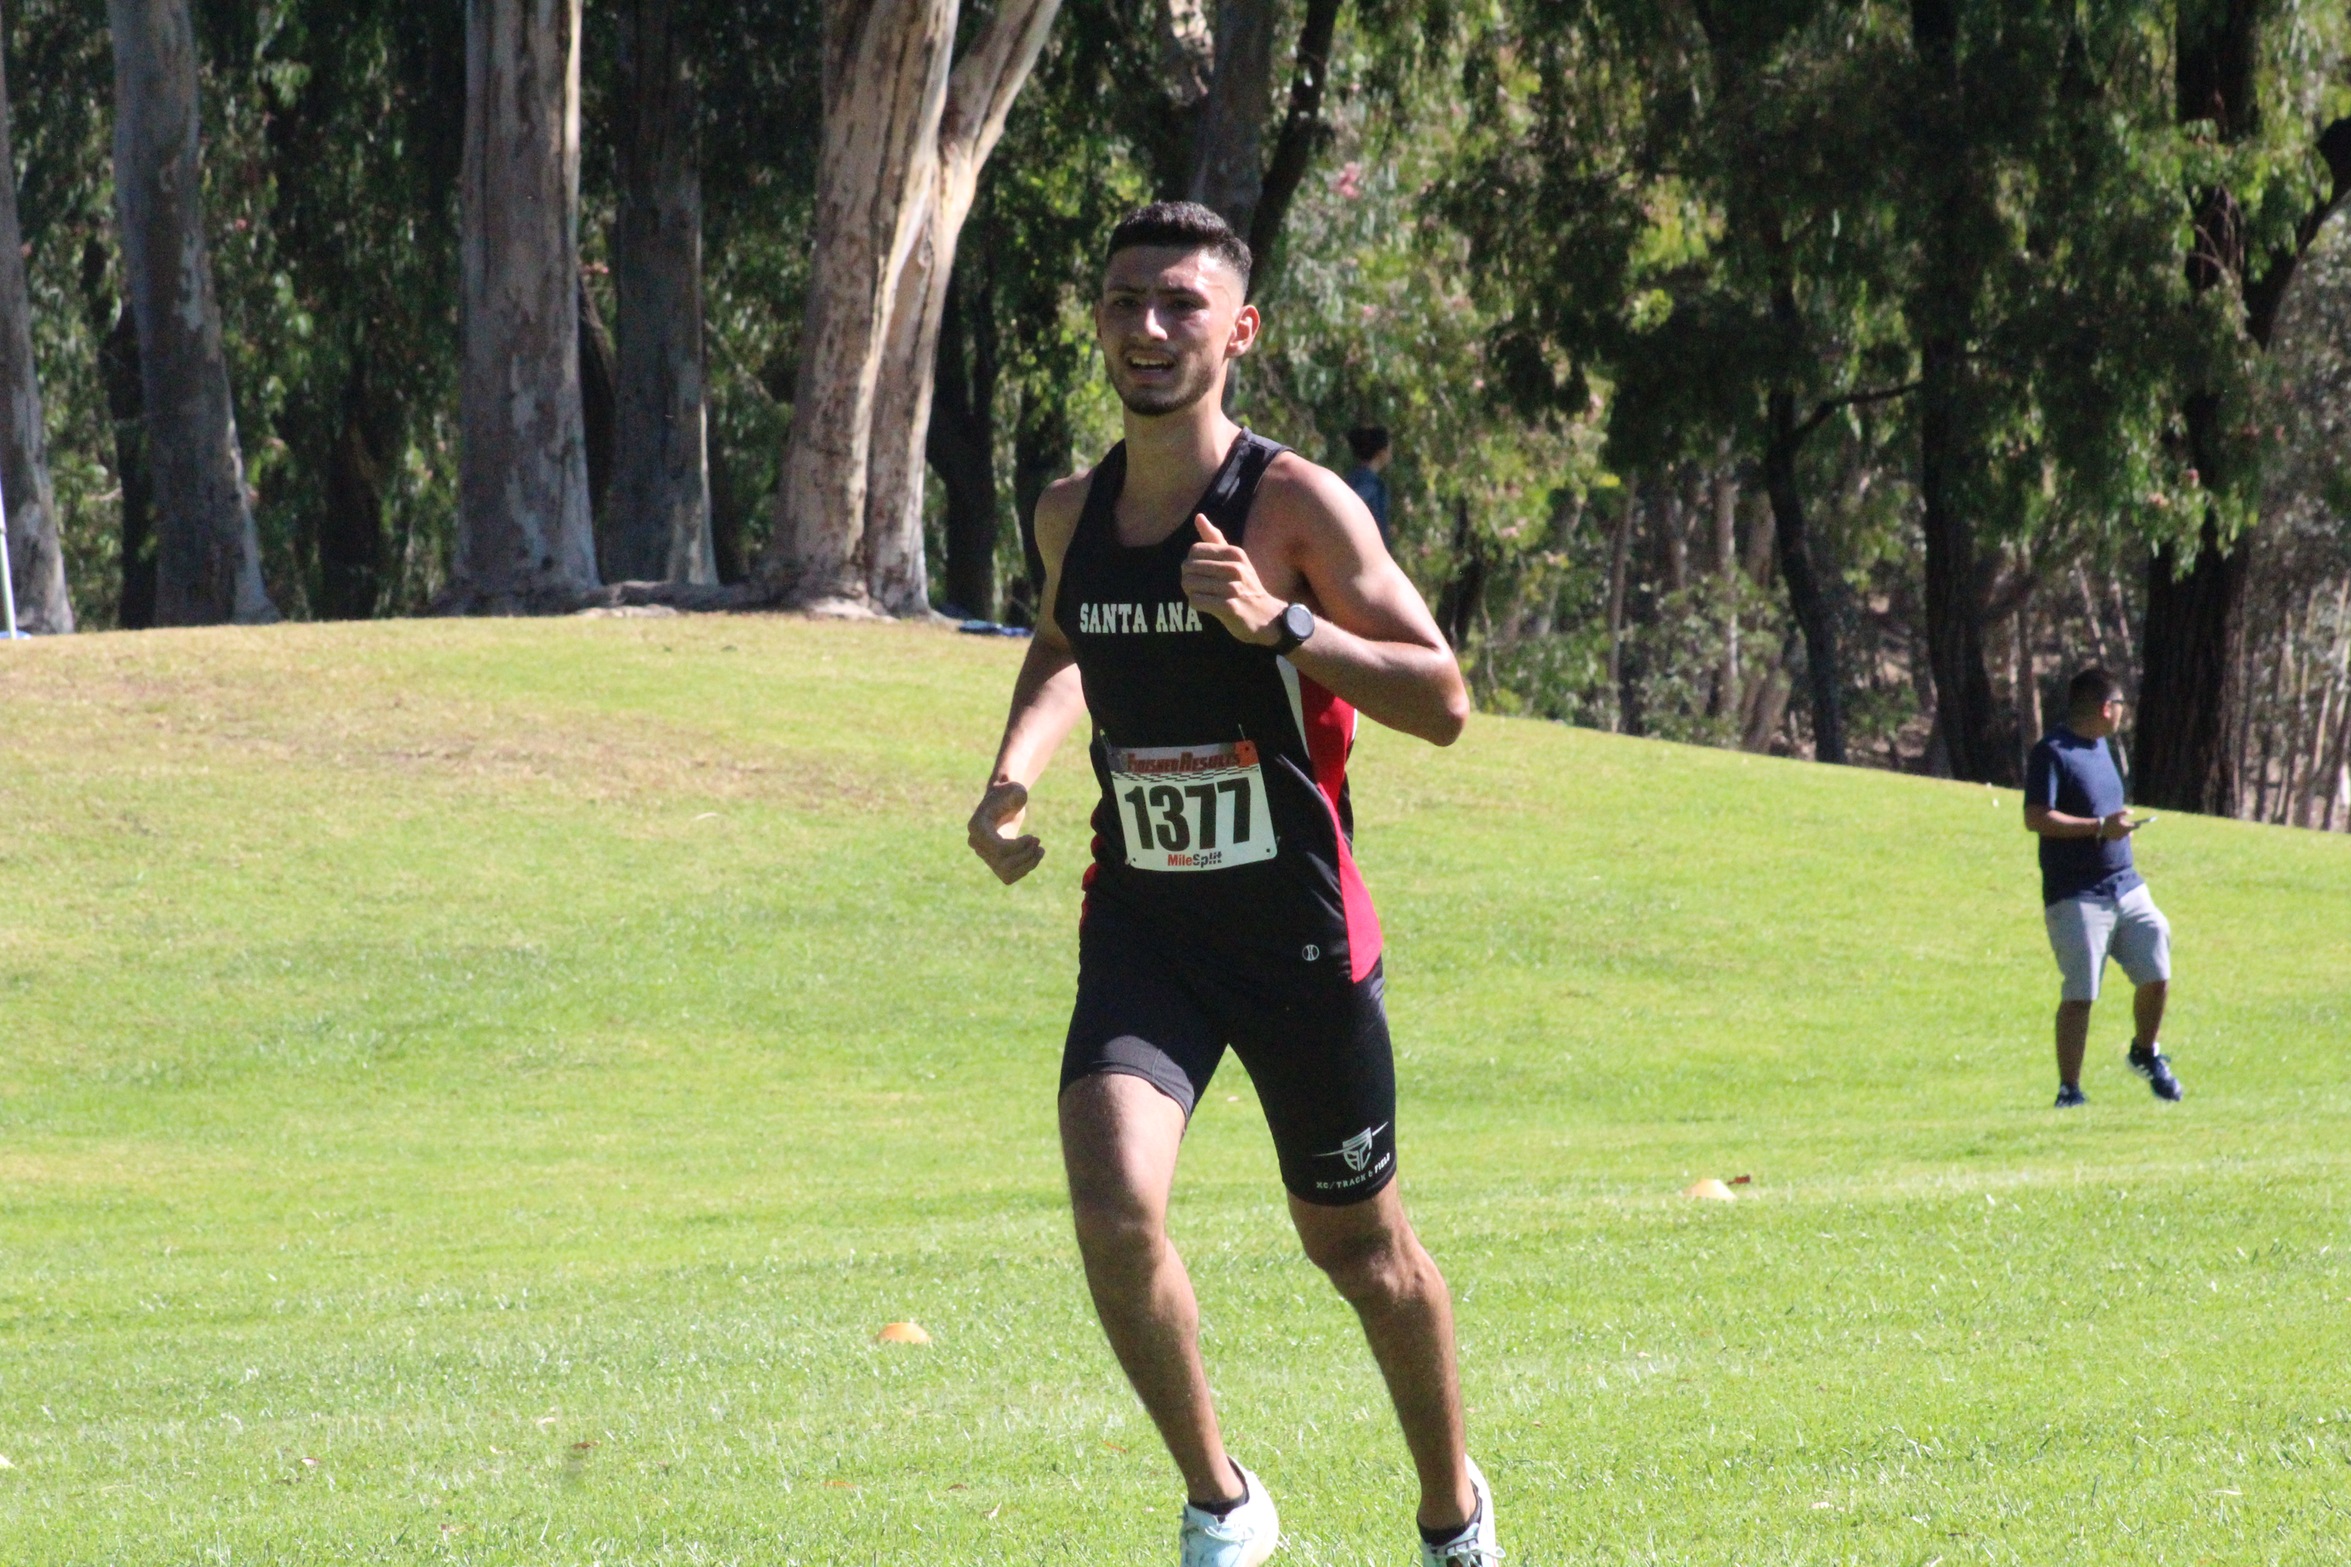 SAC Cross Country Finishes 4th, Trujillo Hits PR to Place 2nd in OEC Finals